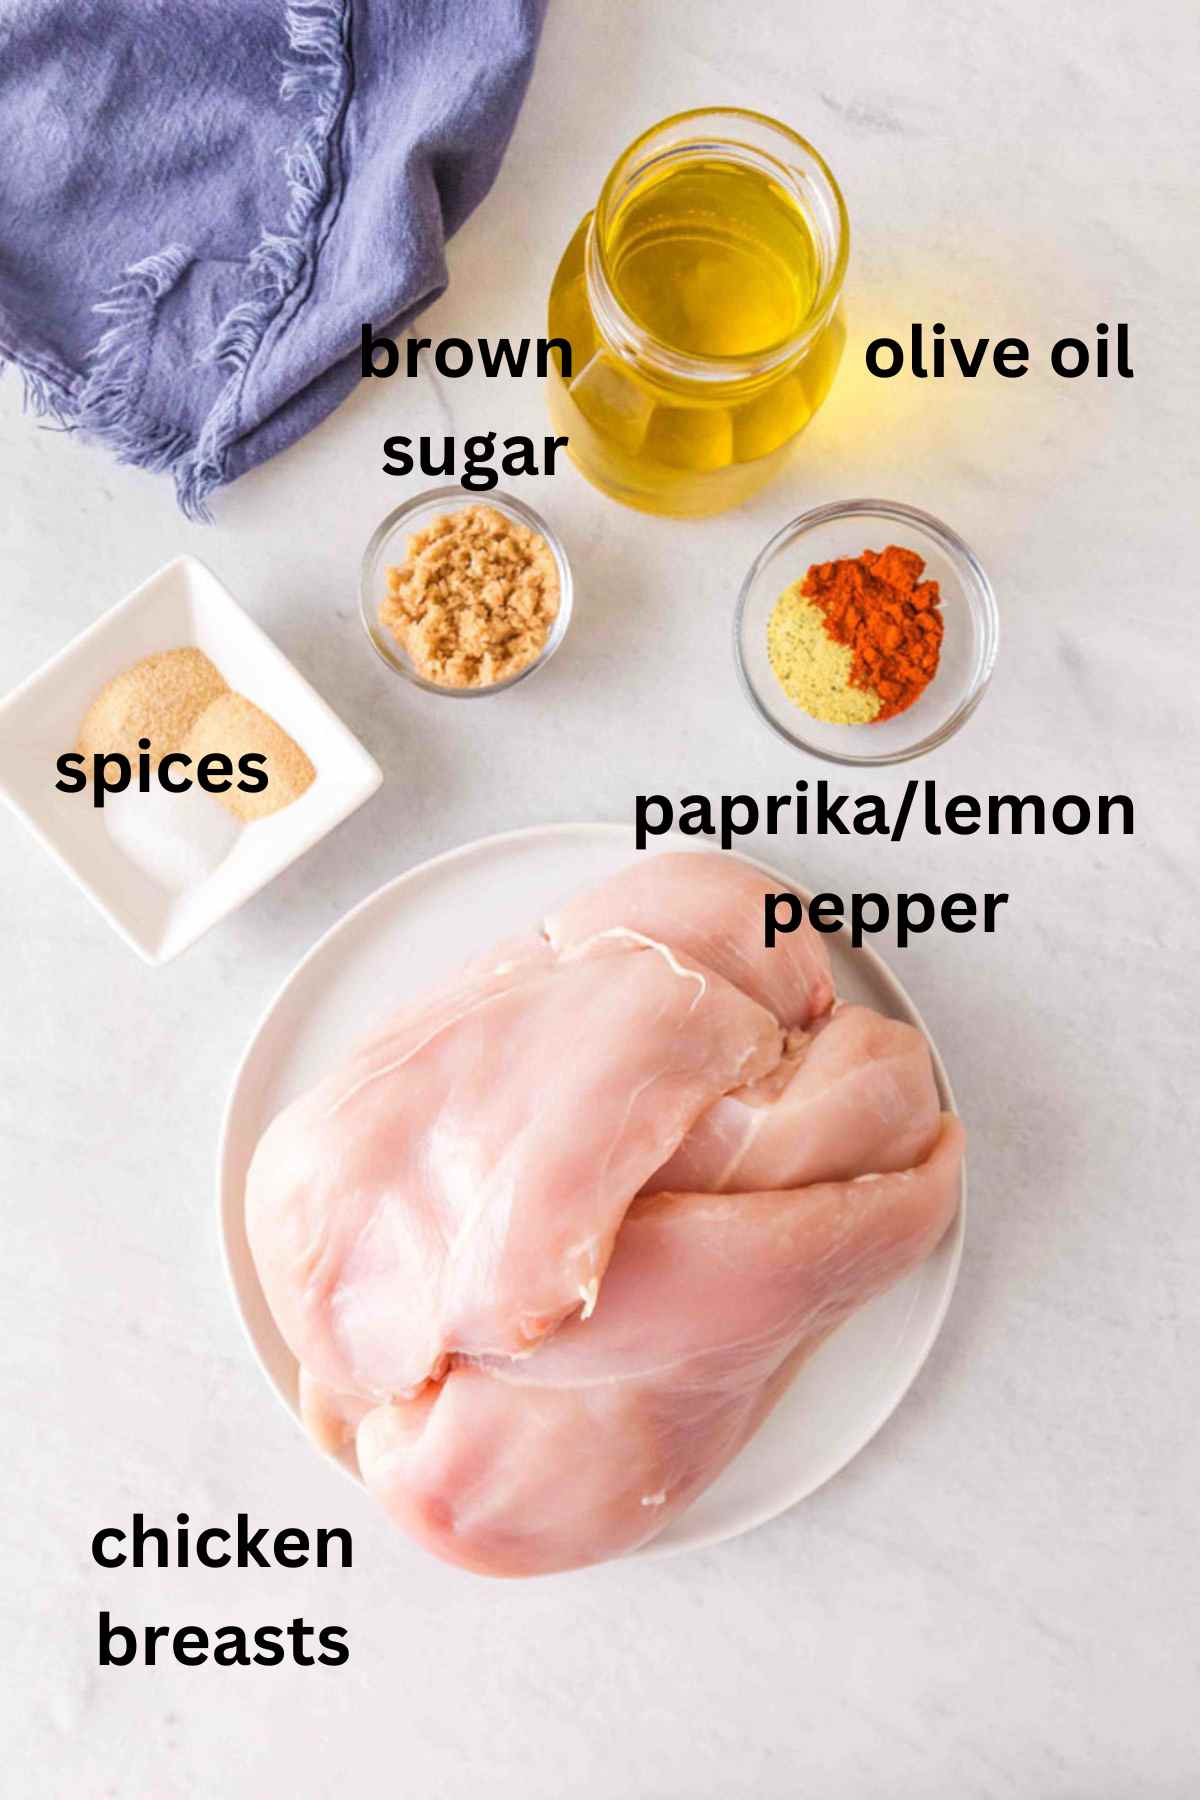 Ingredients needed to cook chicken breasts at 350.